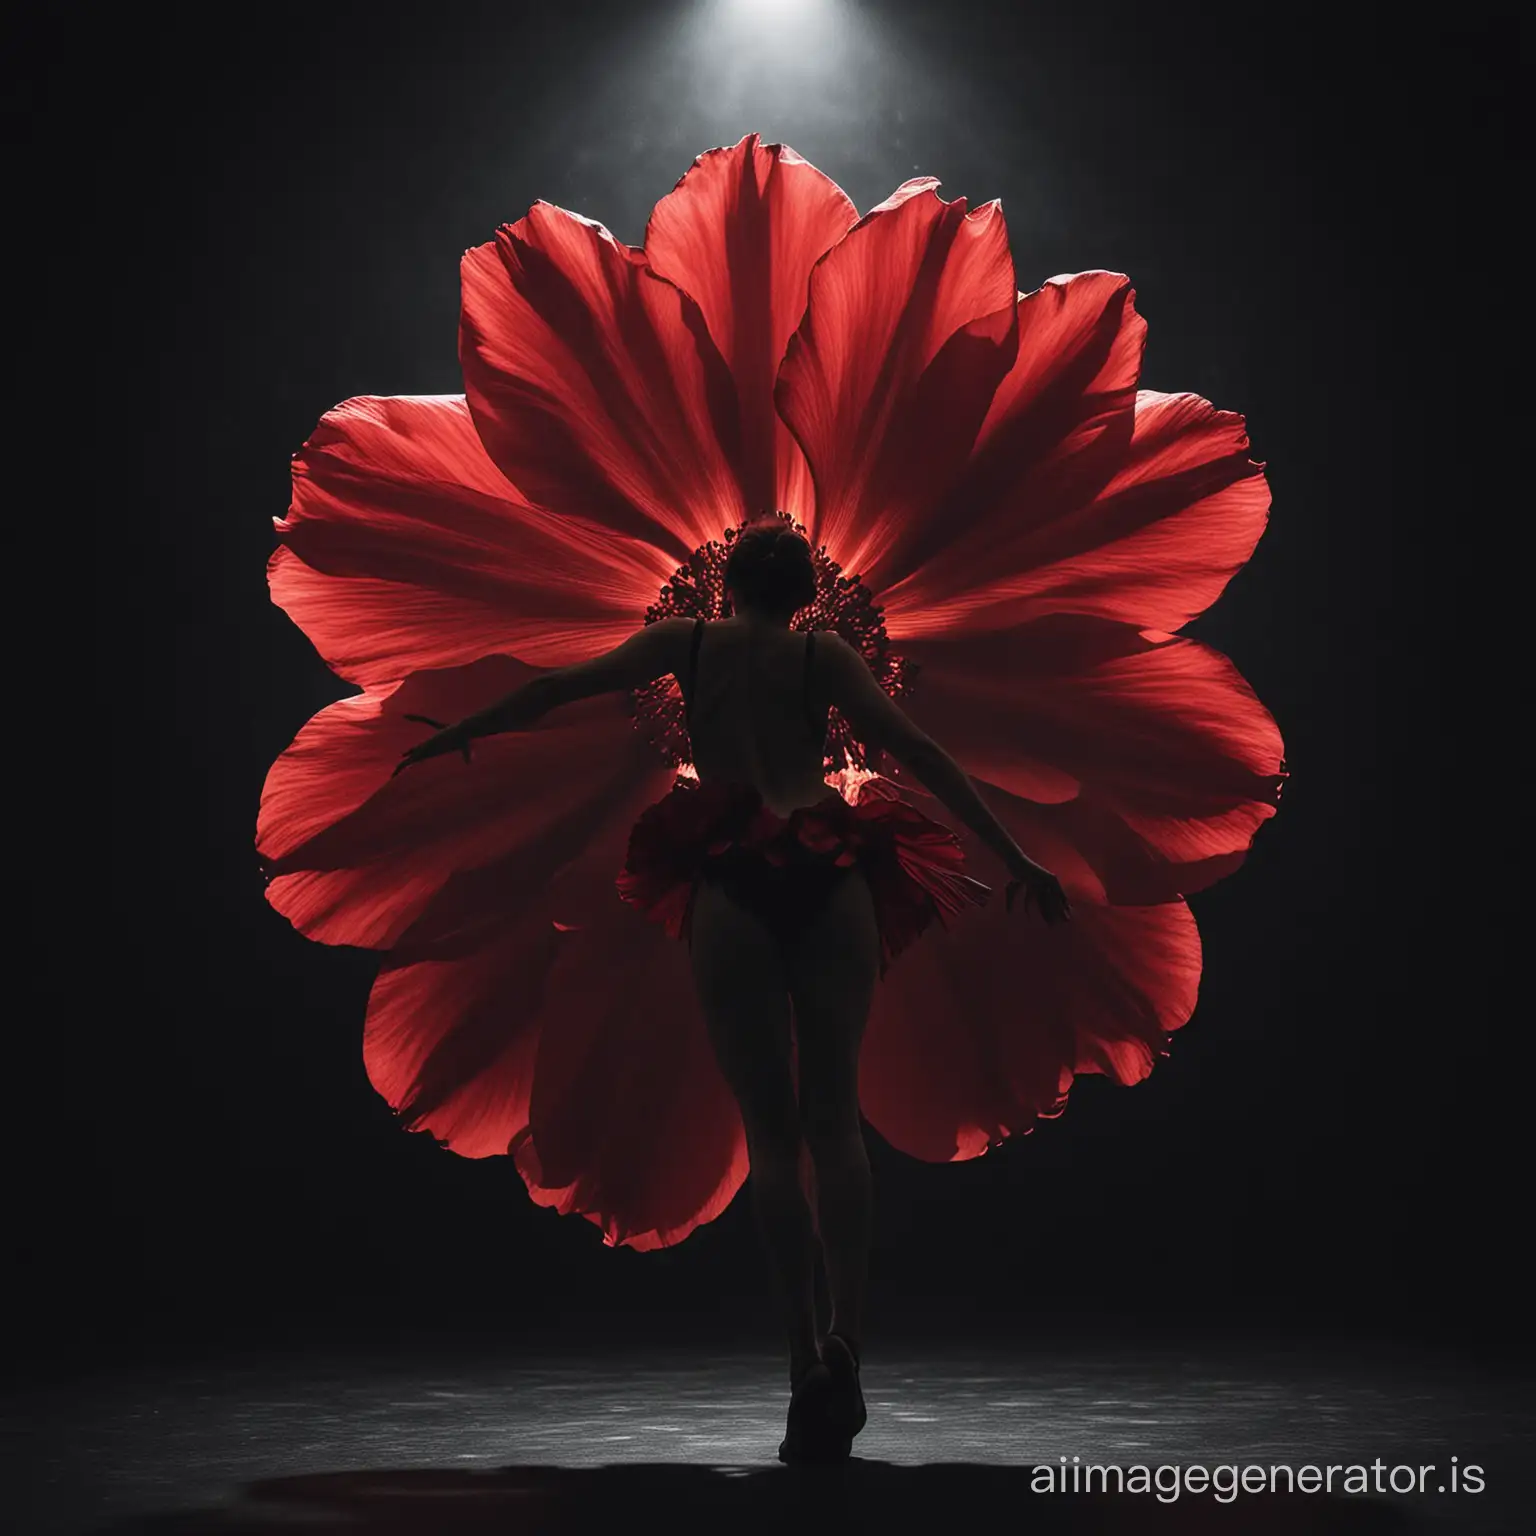 dancer in the dark with Big red flower in her back